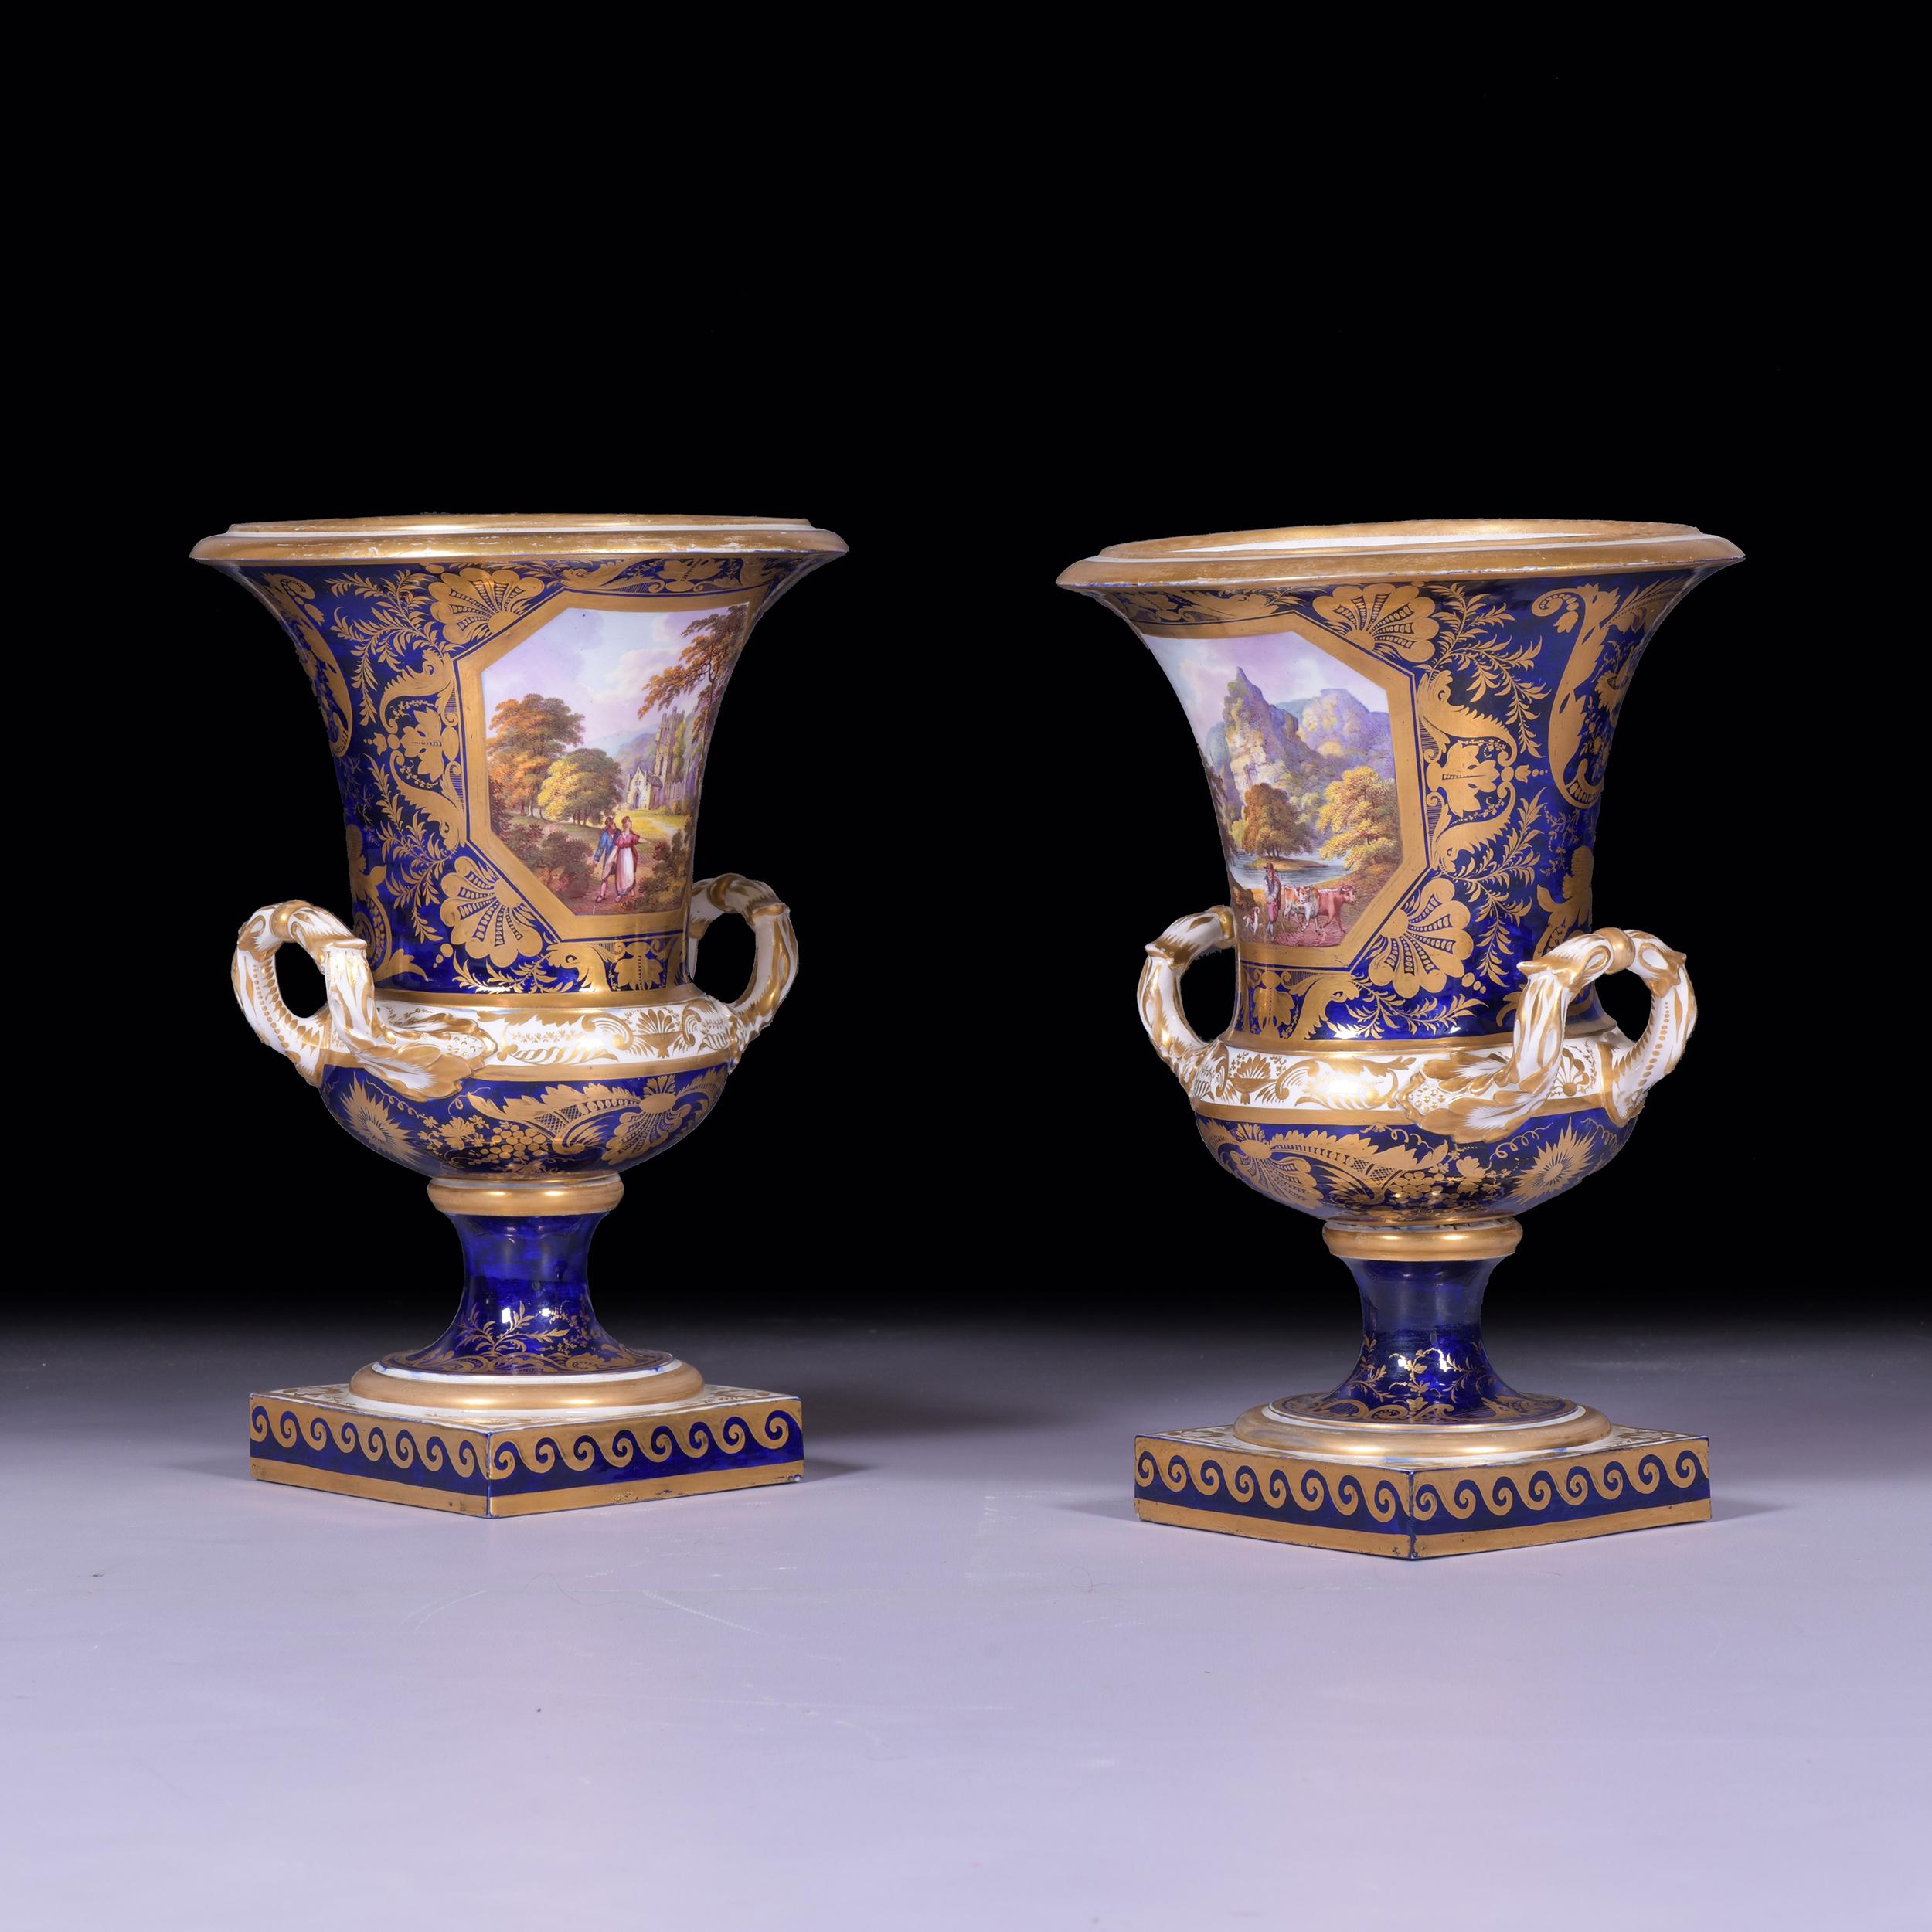 Regency Pair of Early 19th Century English Royal Crown Derby Cobalt Blue Campana Vases